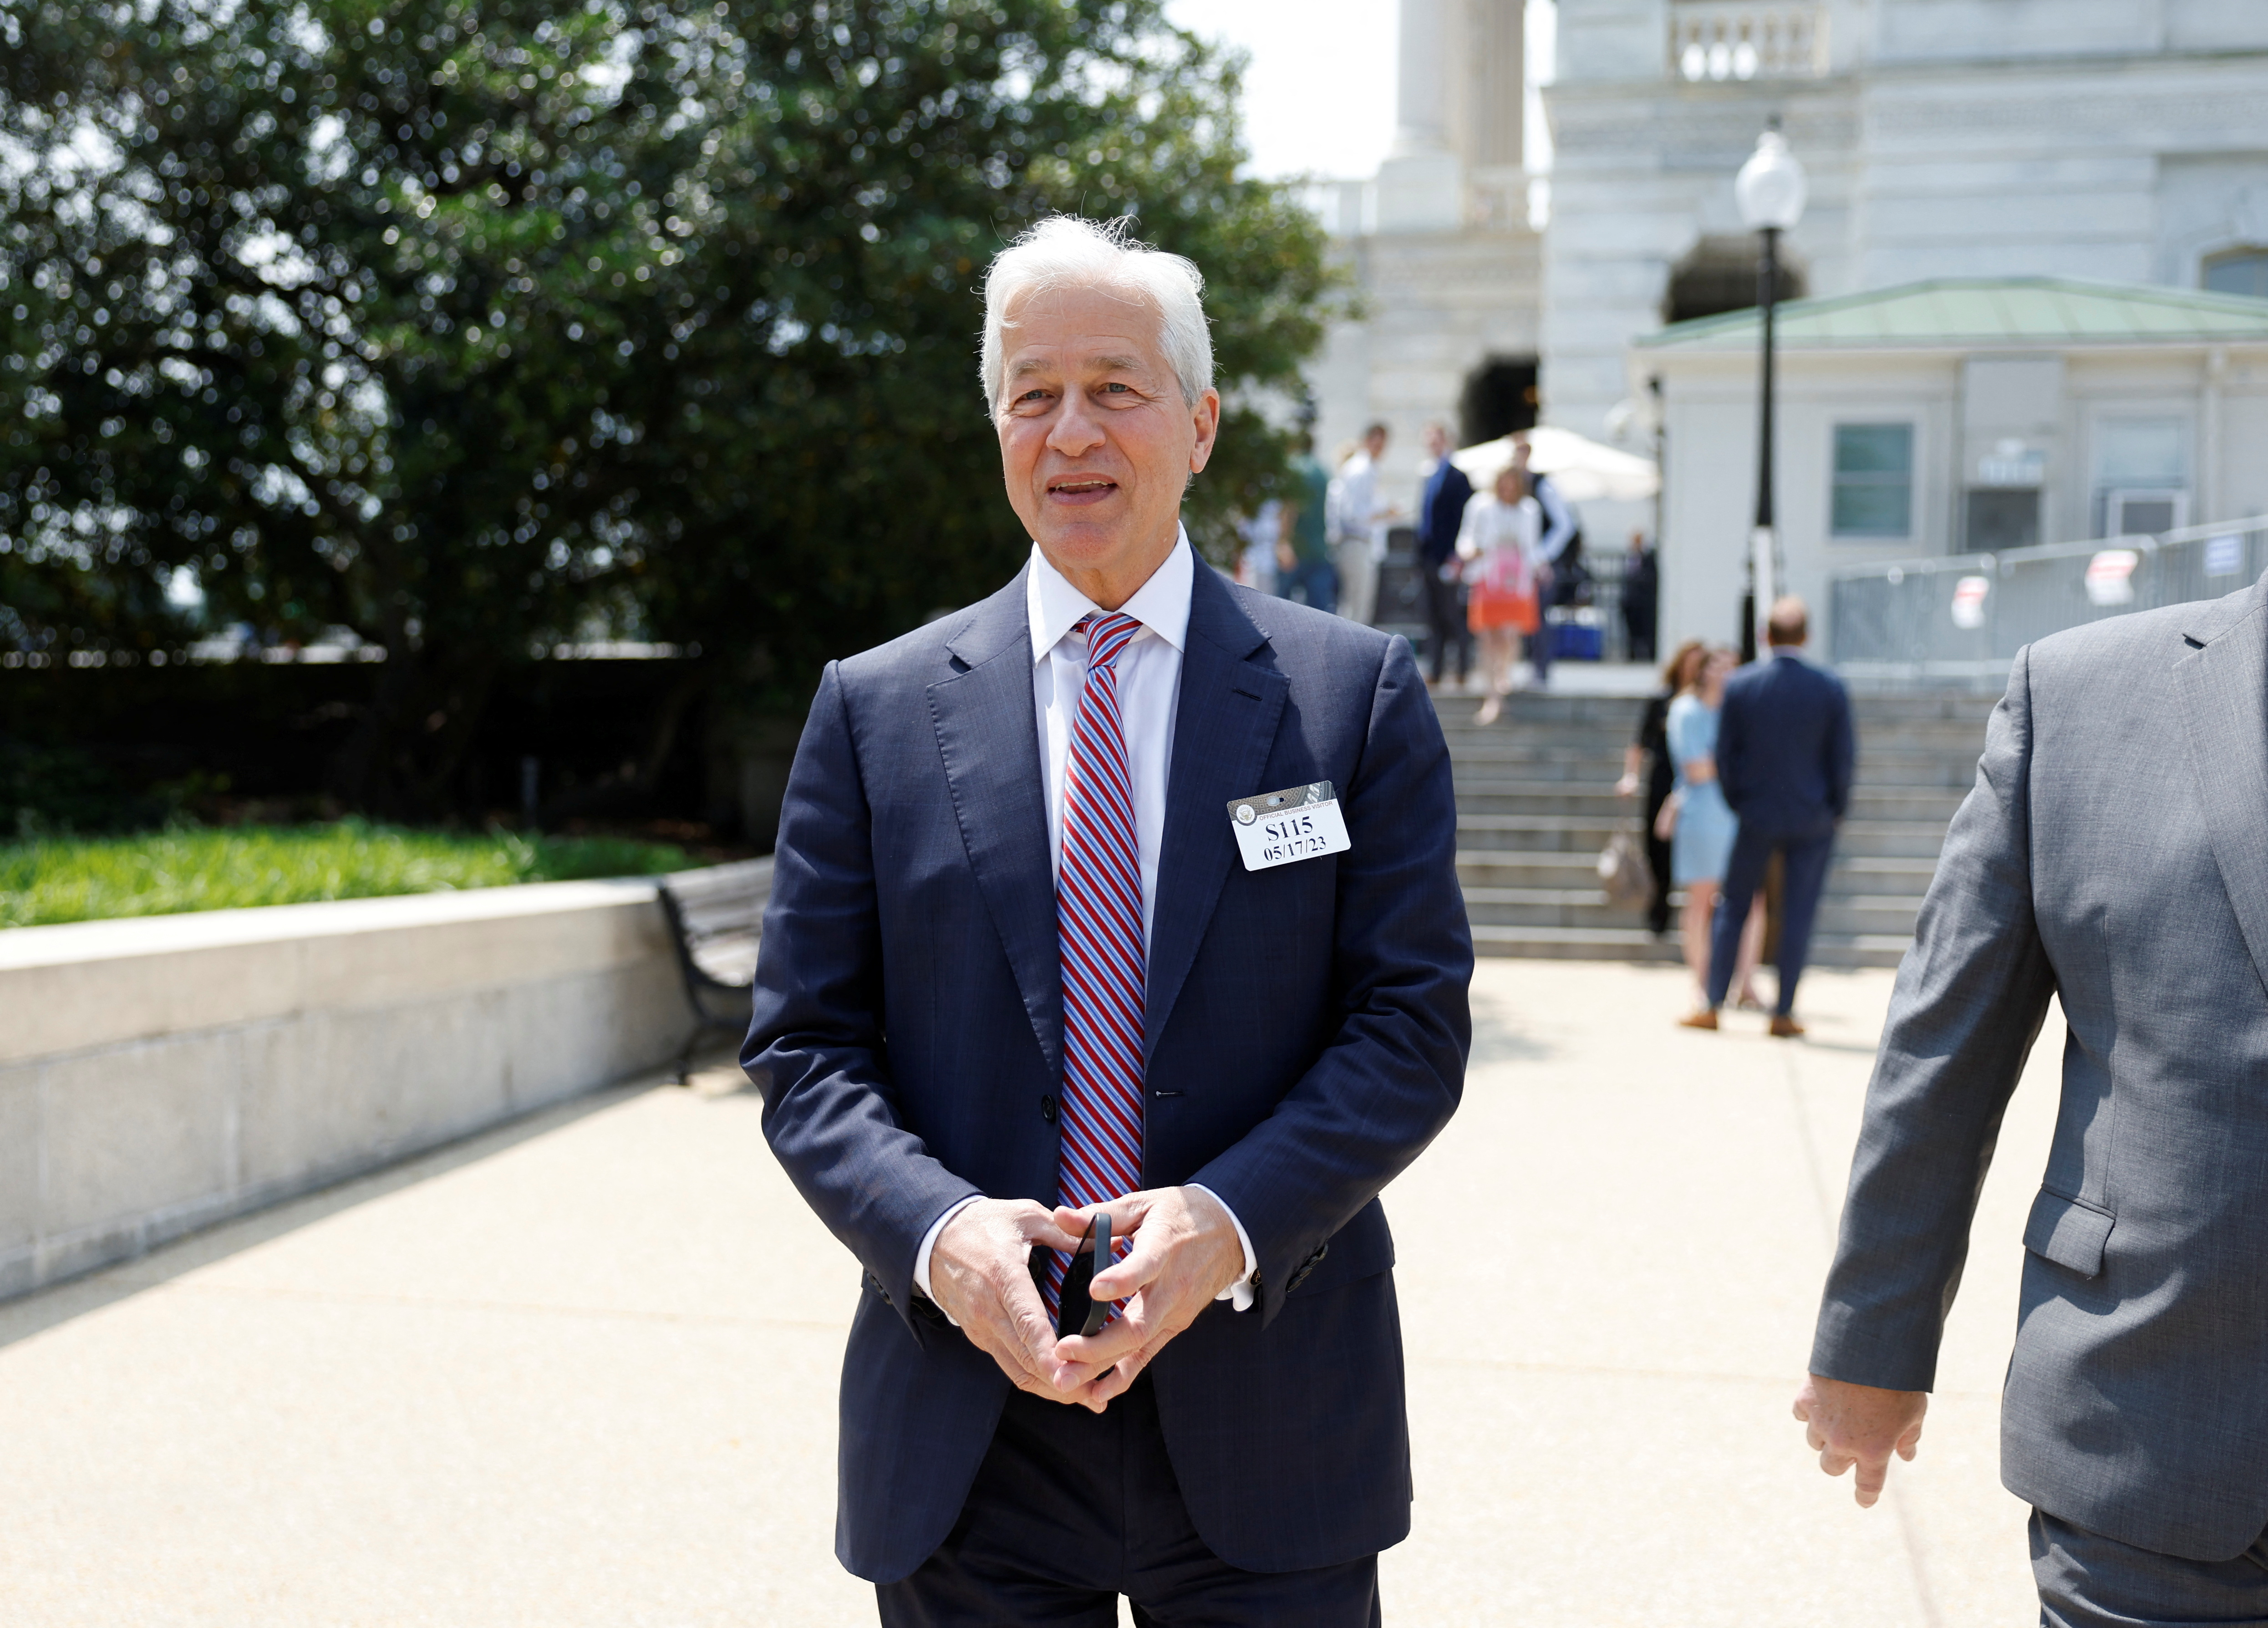 Chase CEO Jamie Dimon leaves meeting with Senate Majority Leader Schumer in Washington